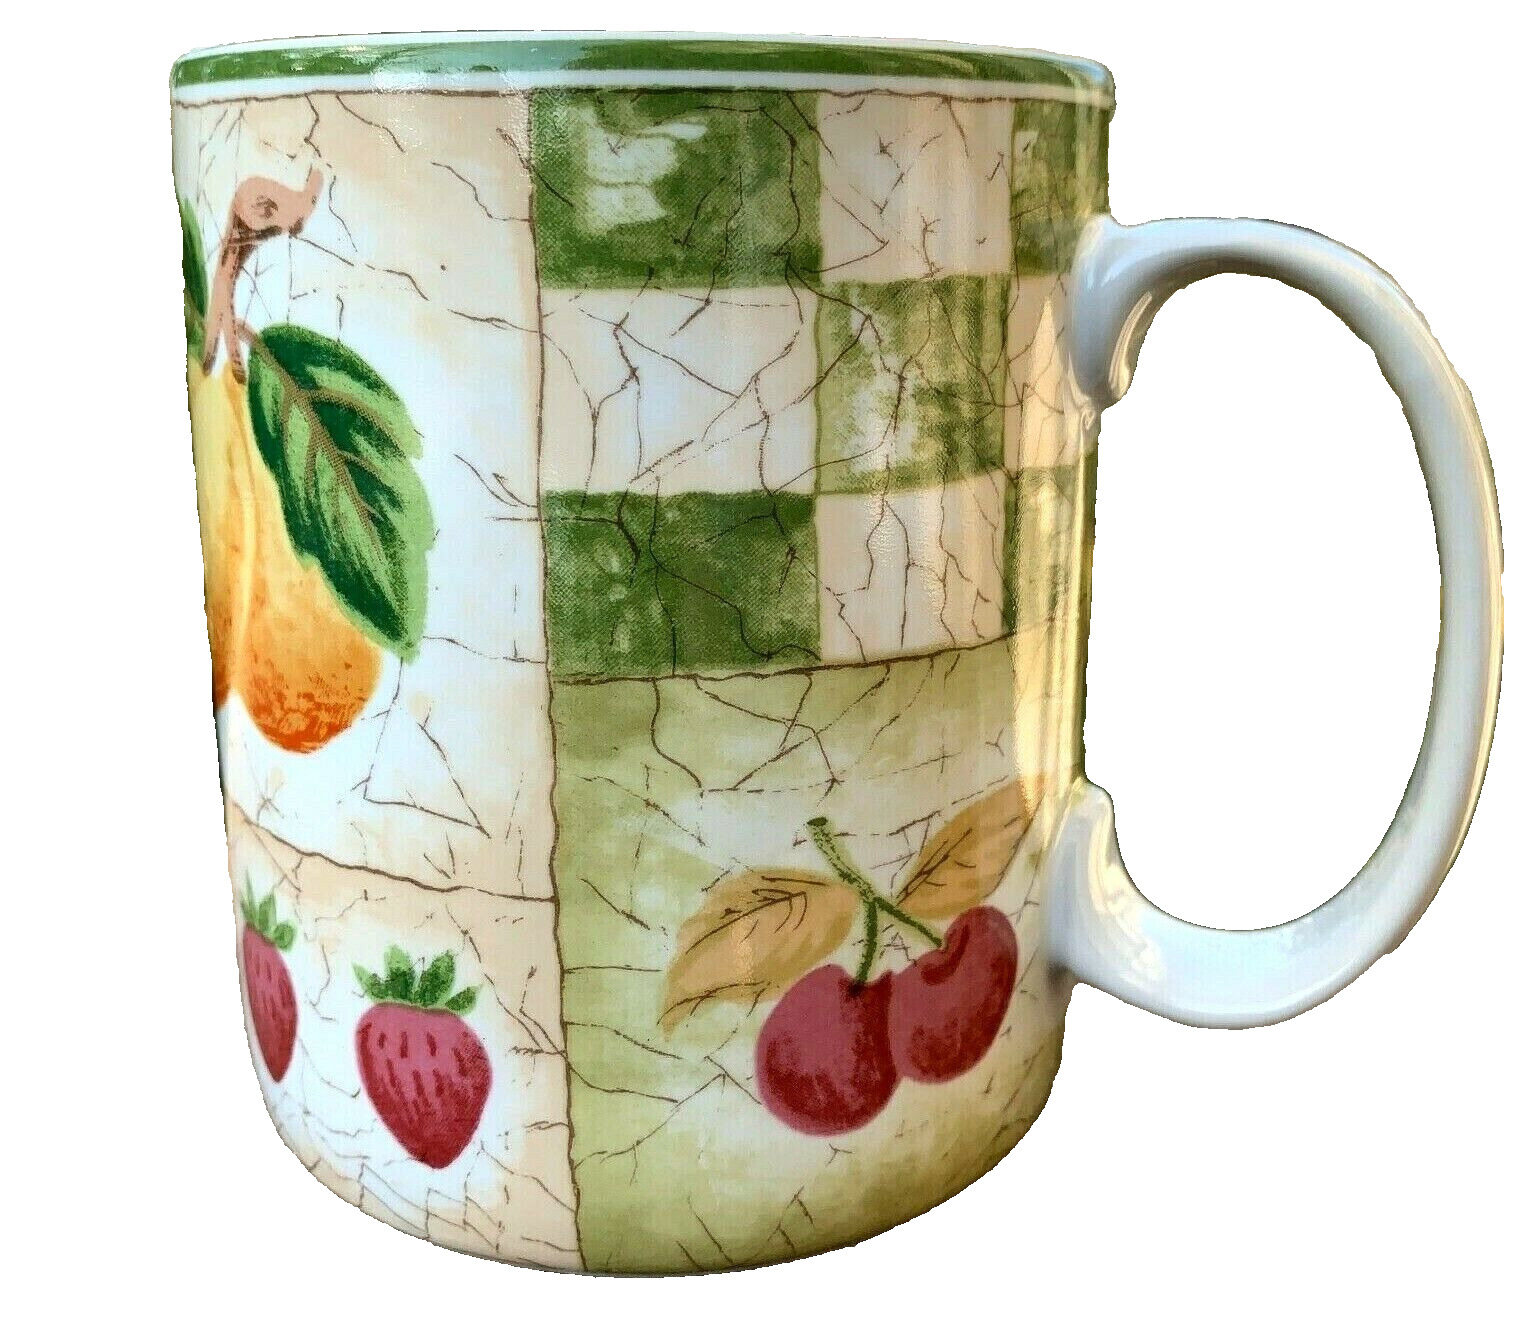 Coventry Porcelain Mug 2PC SET Coffee Cups Fruit Design Pears Cherries INDONESIA